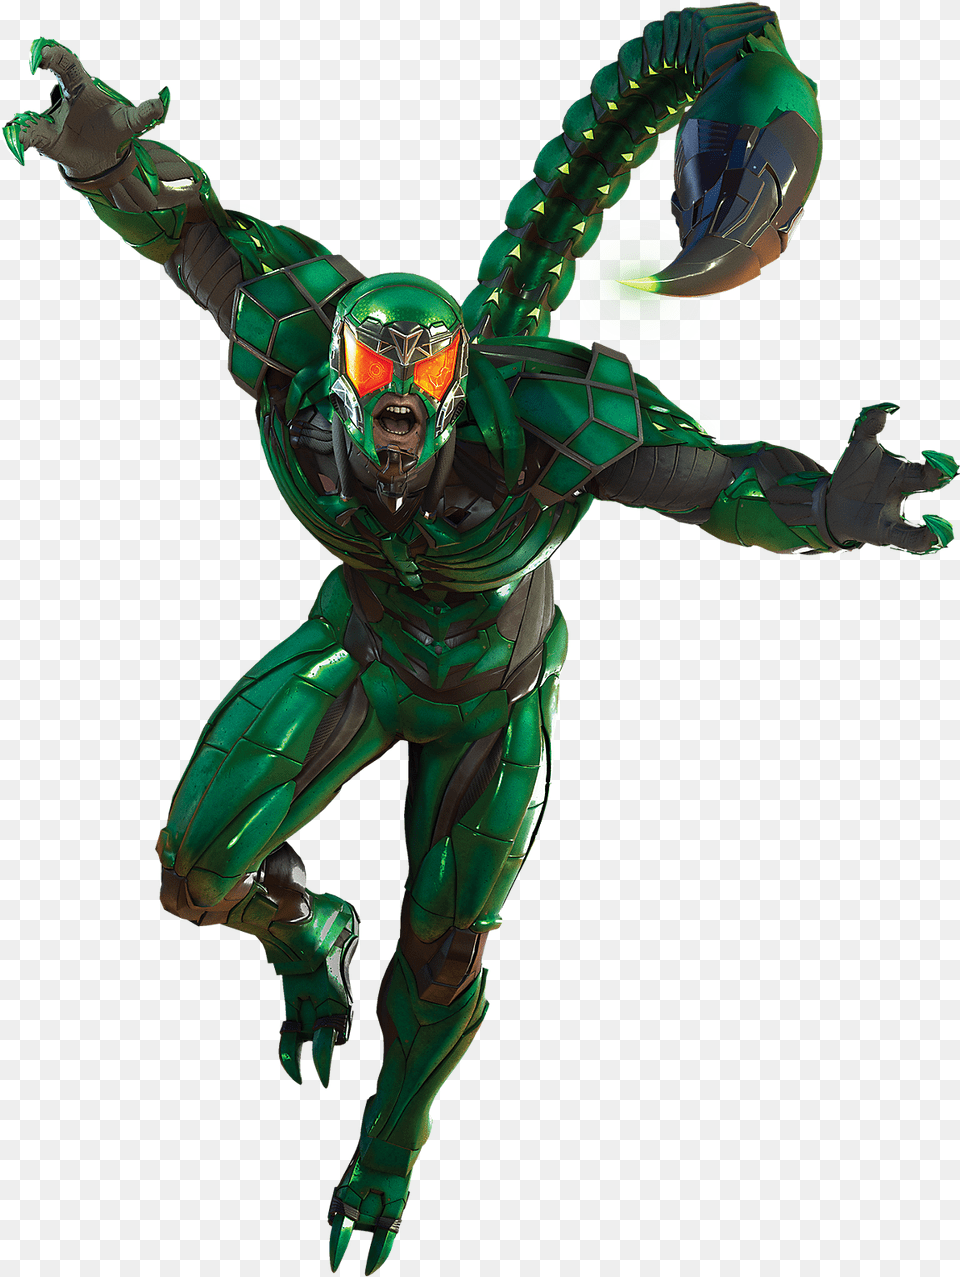 Spider Man Ps4 Spider Man Ps4 Scorpion, Green, Alien, Person, Accessories Free Transparent Png